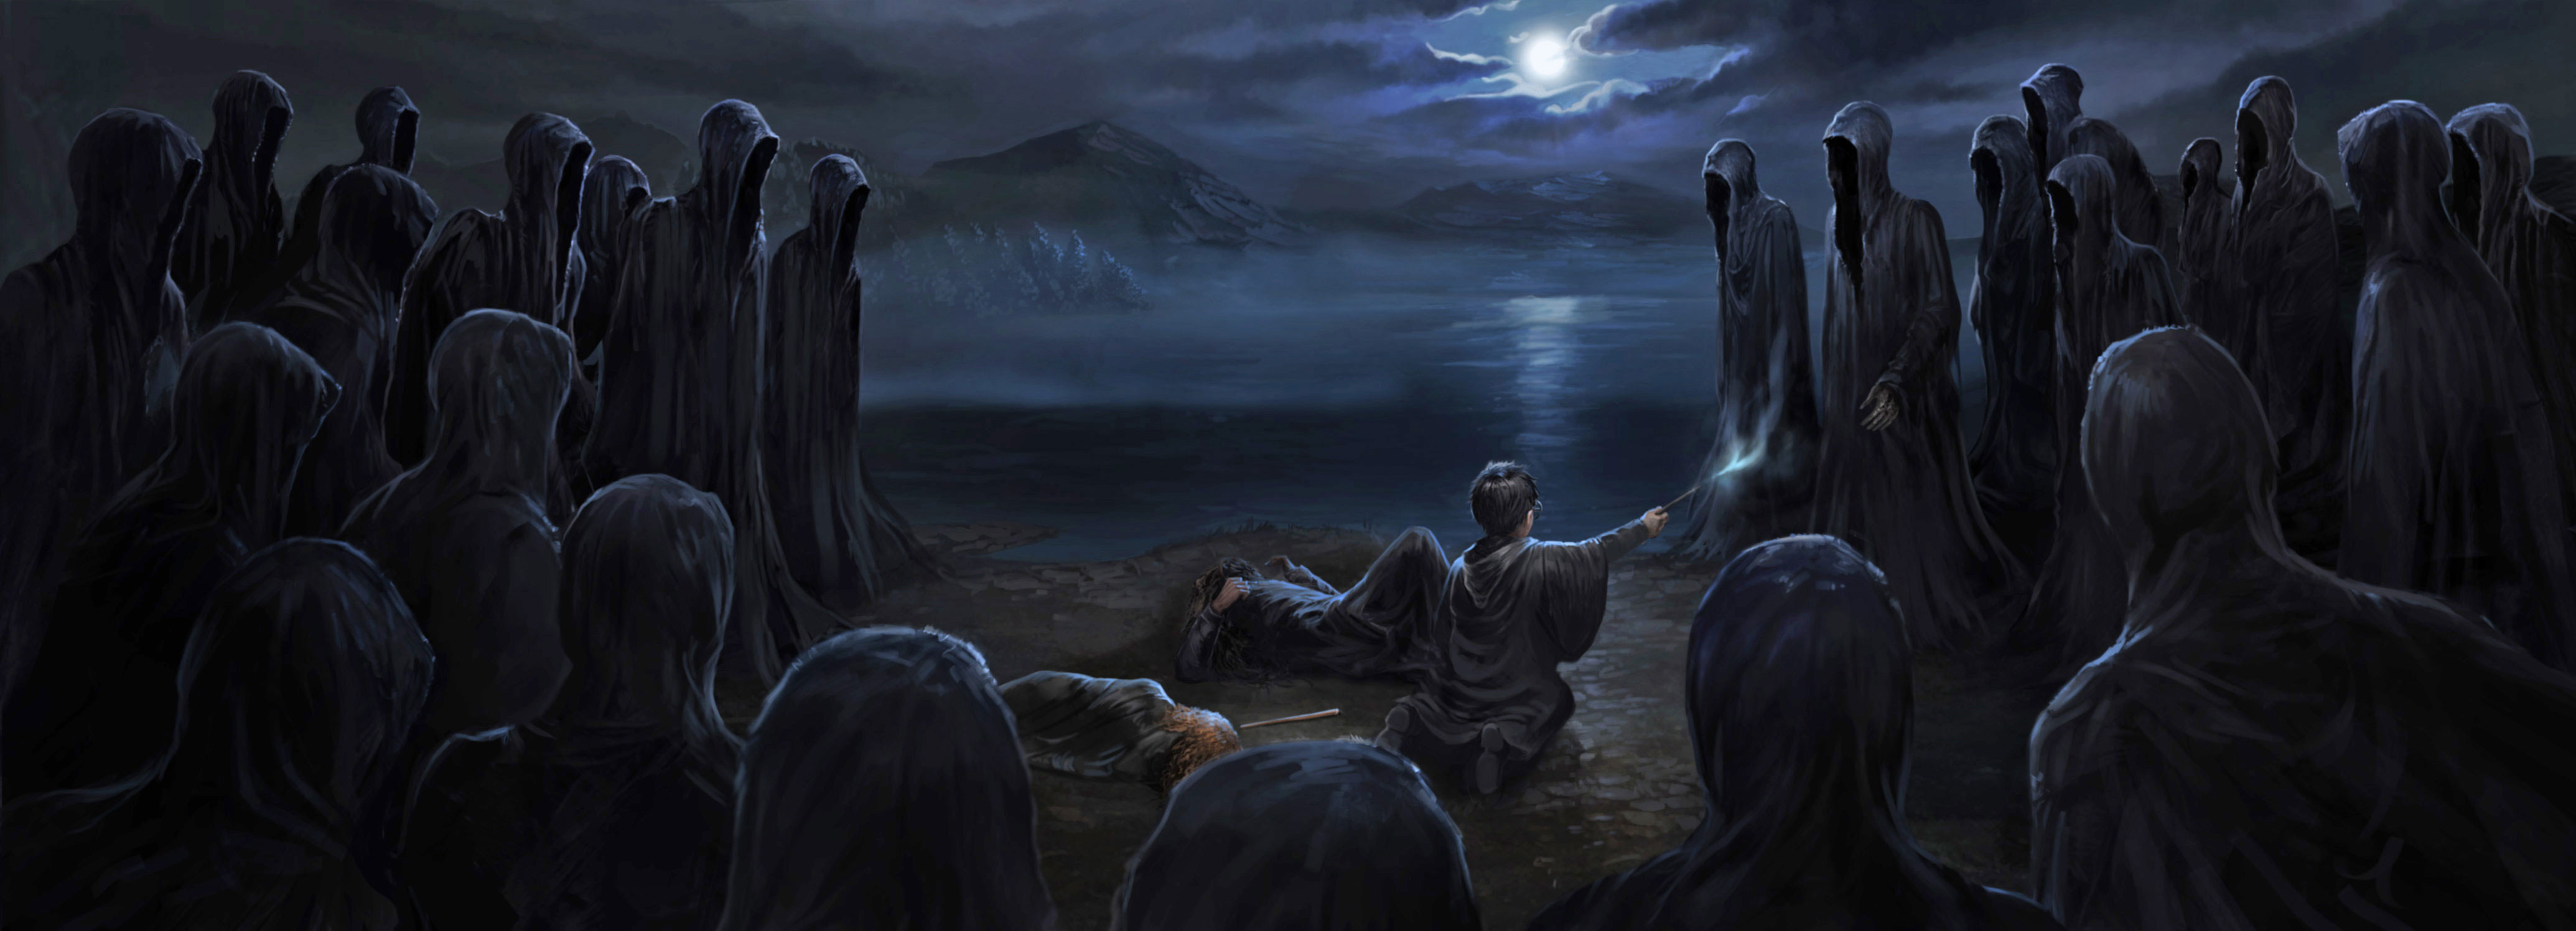 Pottermore Moments Revisited: Tales in the Moonlight